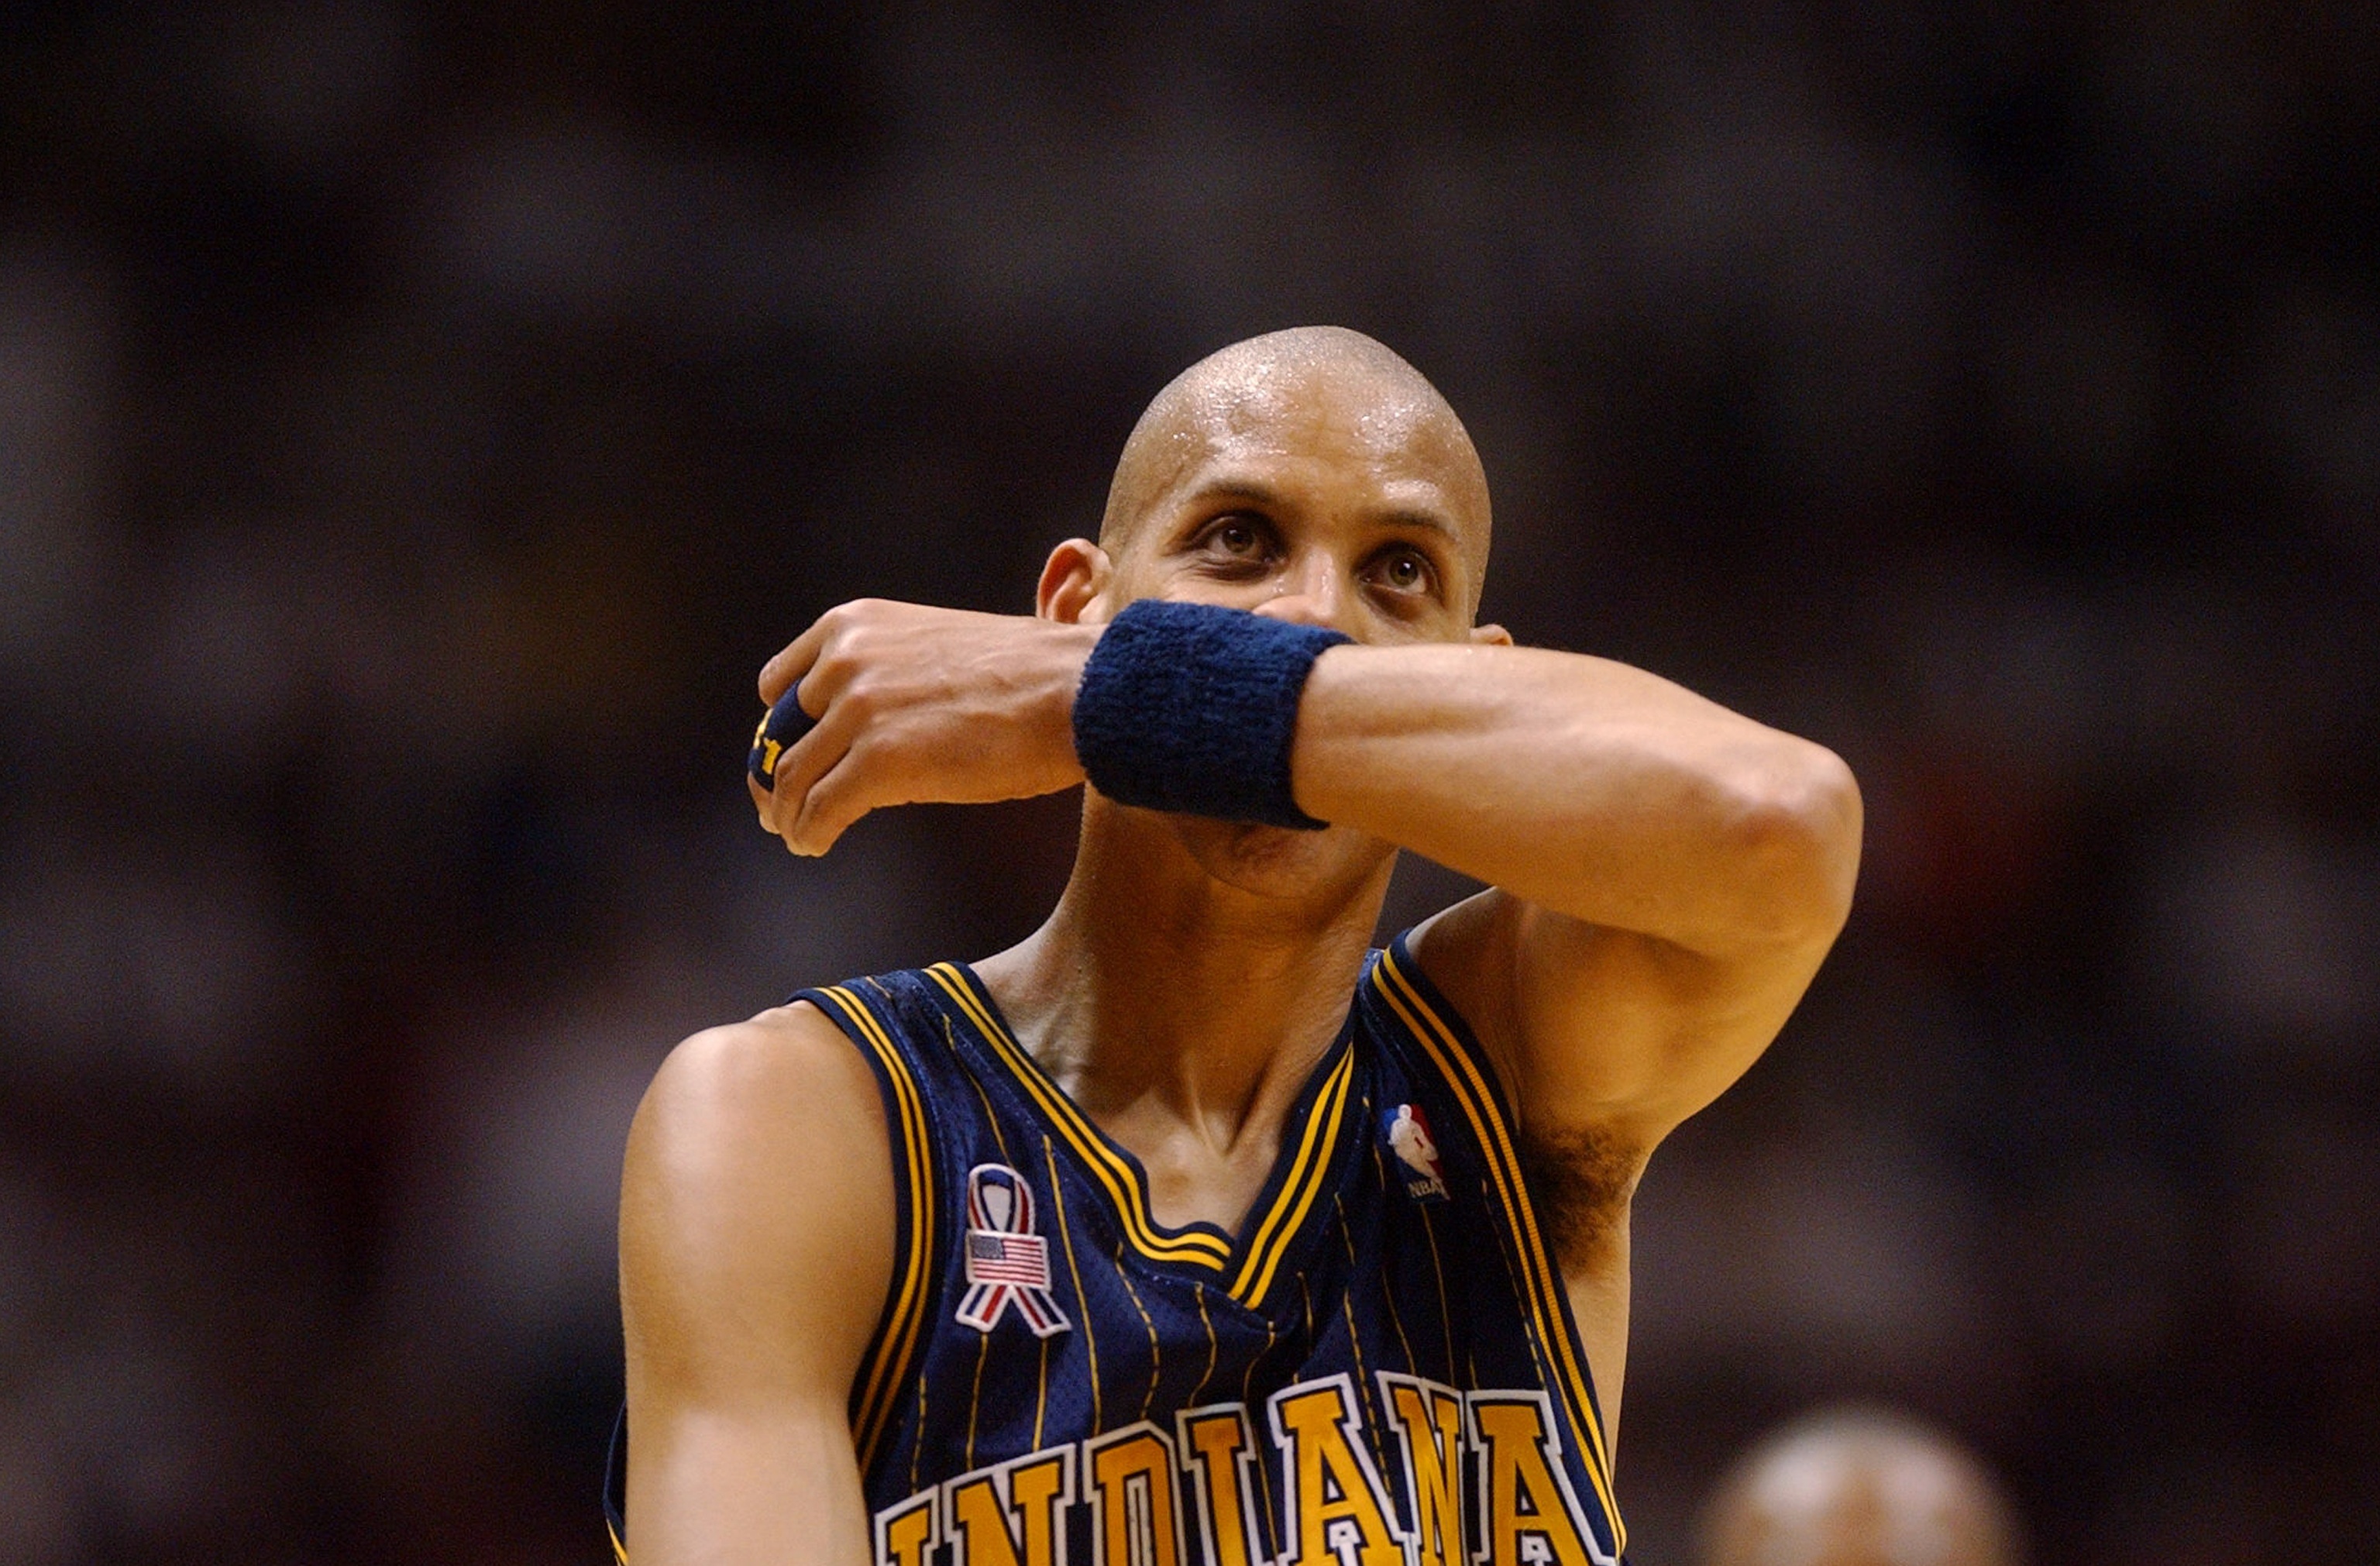 Indiana Pacers great Reggie Miller looks on during the 2002 NBA Playoffs